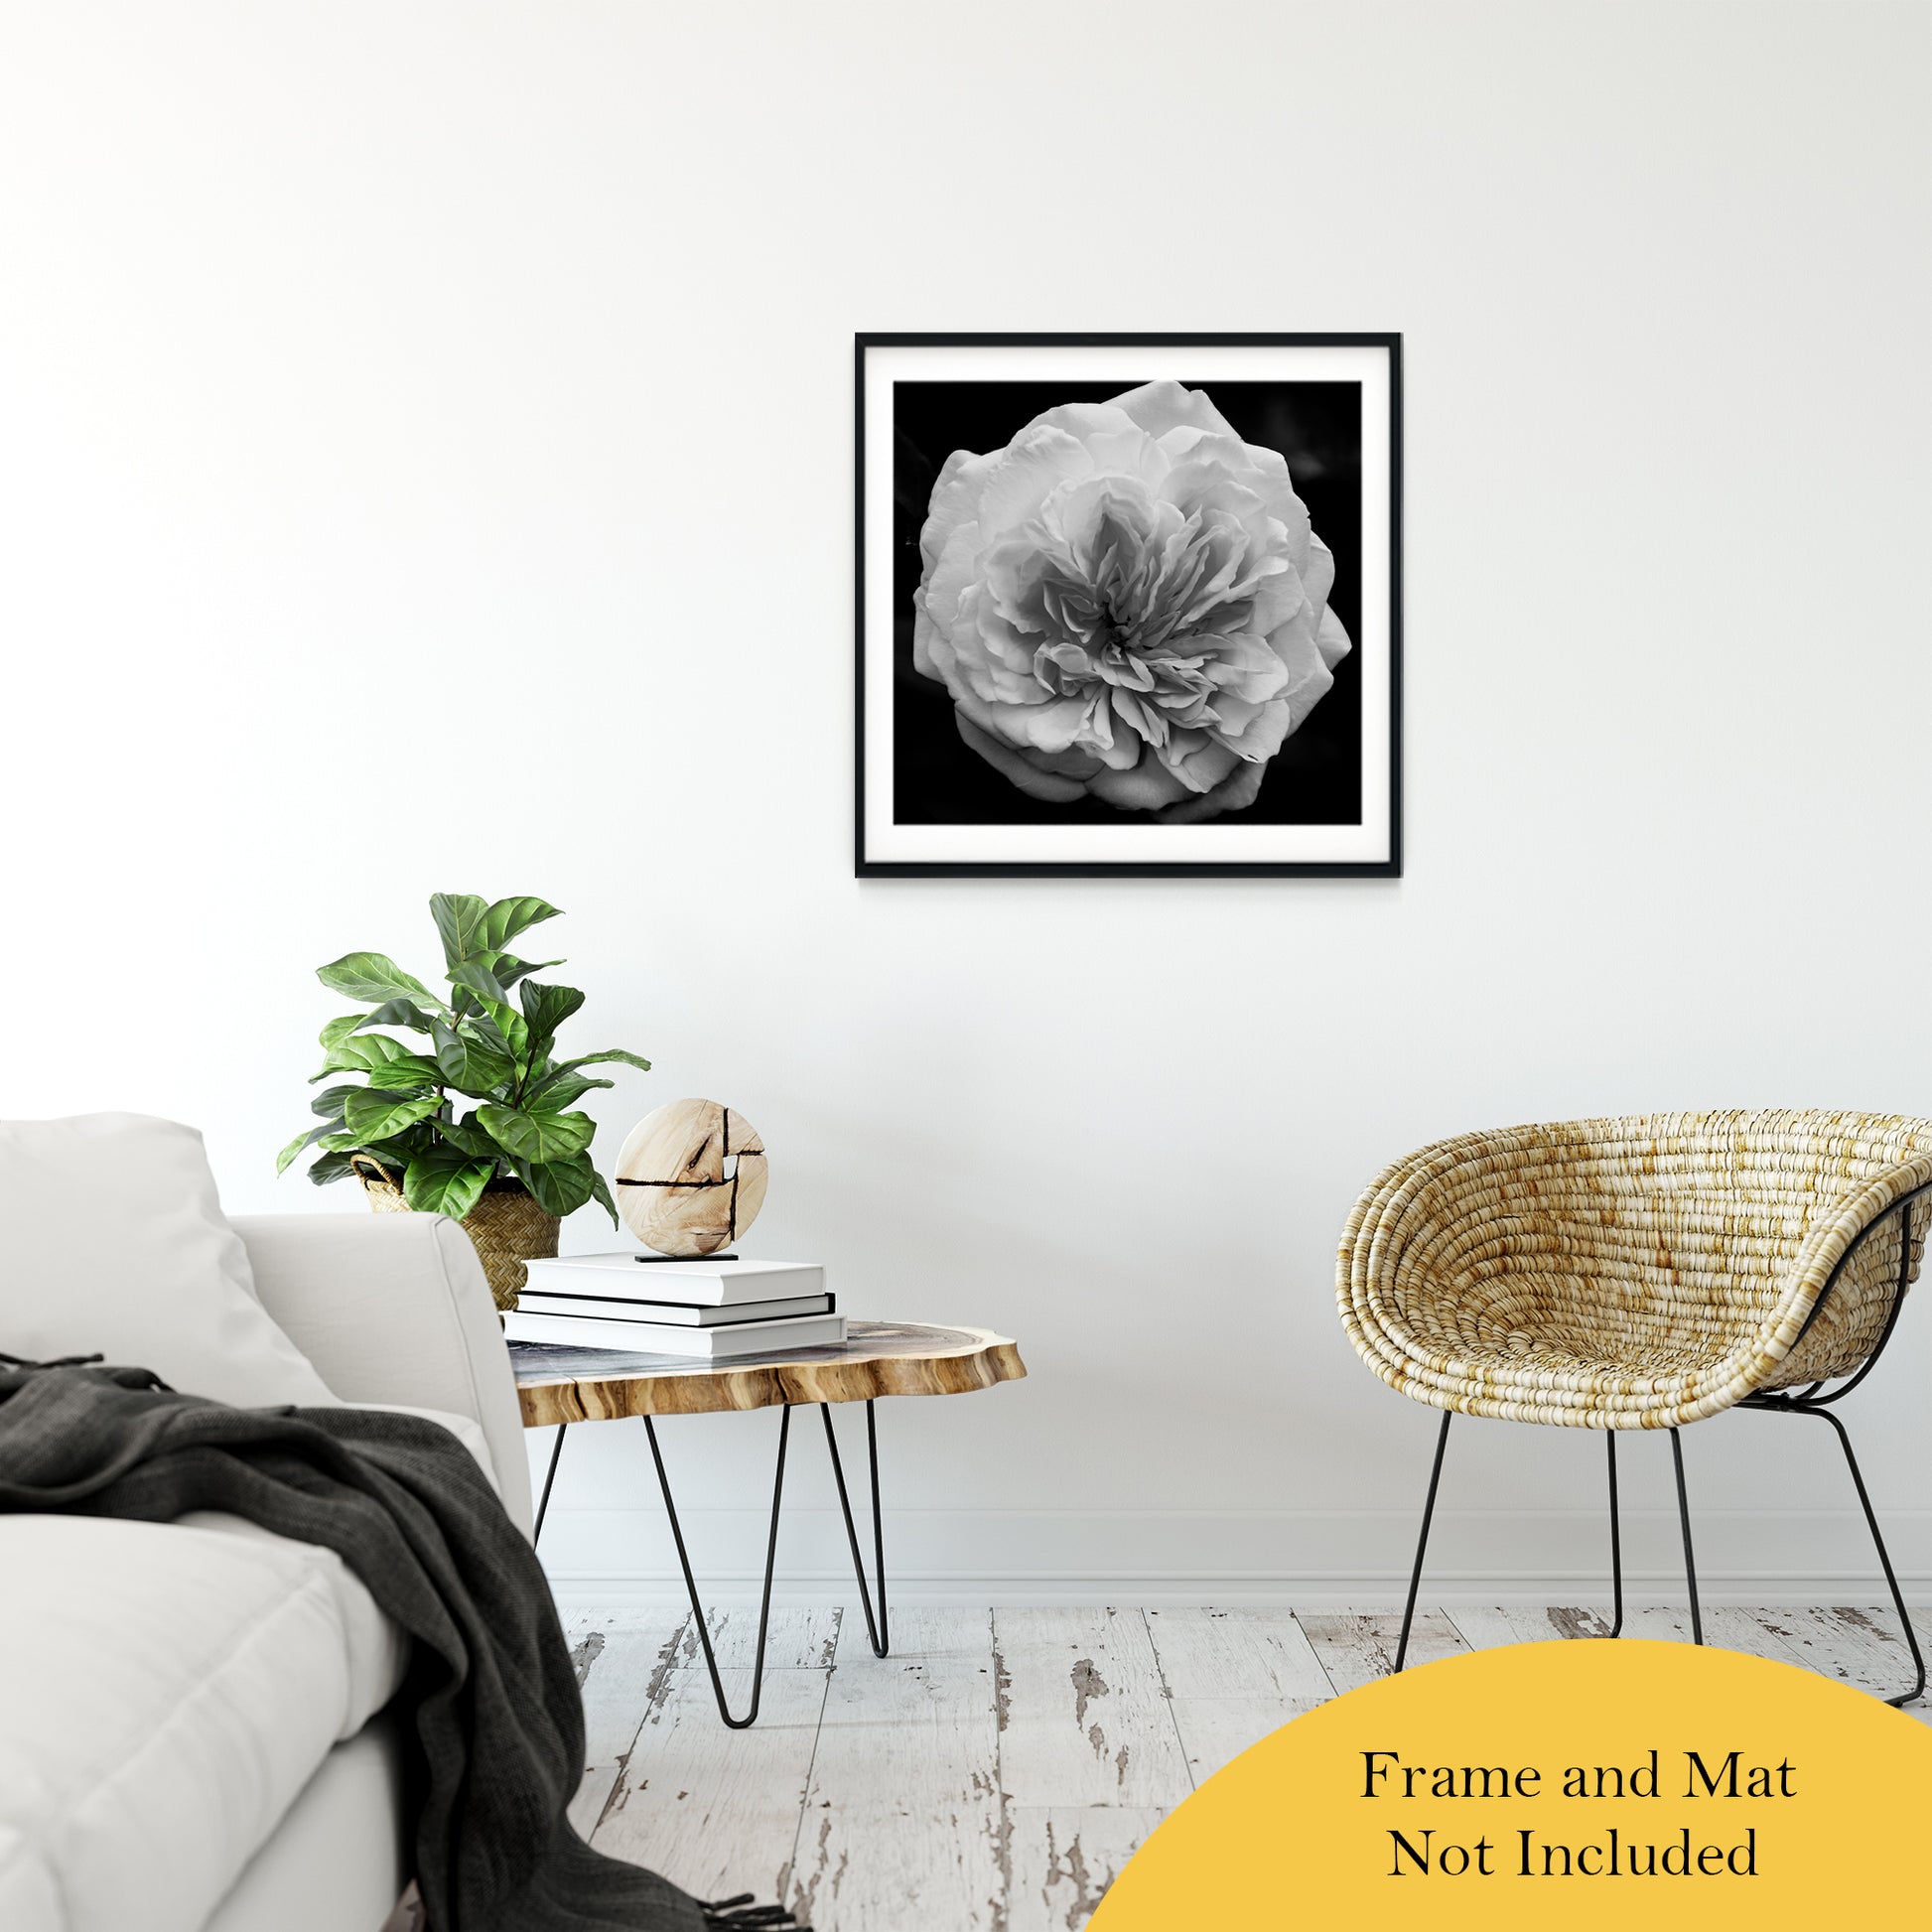 Ikea Nature Wall Art: Alchymist Rose Black & White - Square  Nature / Floral Photo Fine Art & Unframed Wall Art Prints 30" x 30" / Classic Paper - Unframed - PIPAFINEART